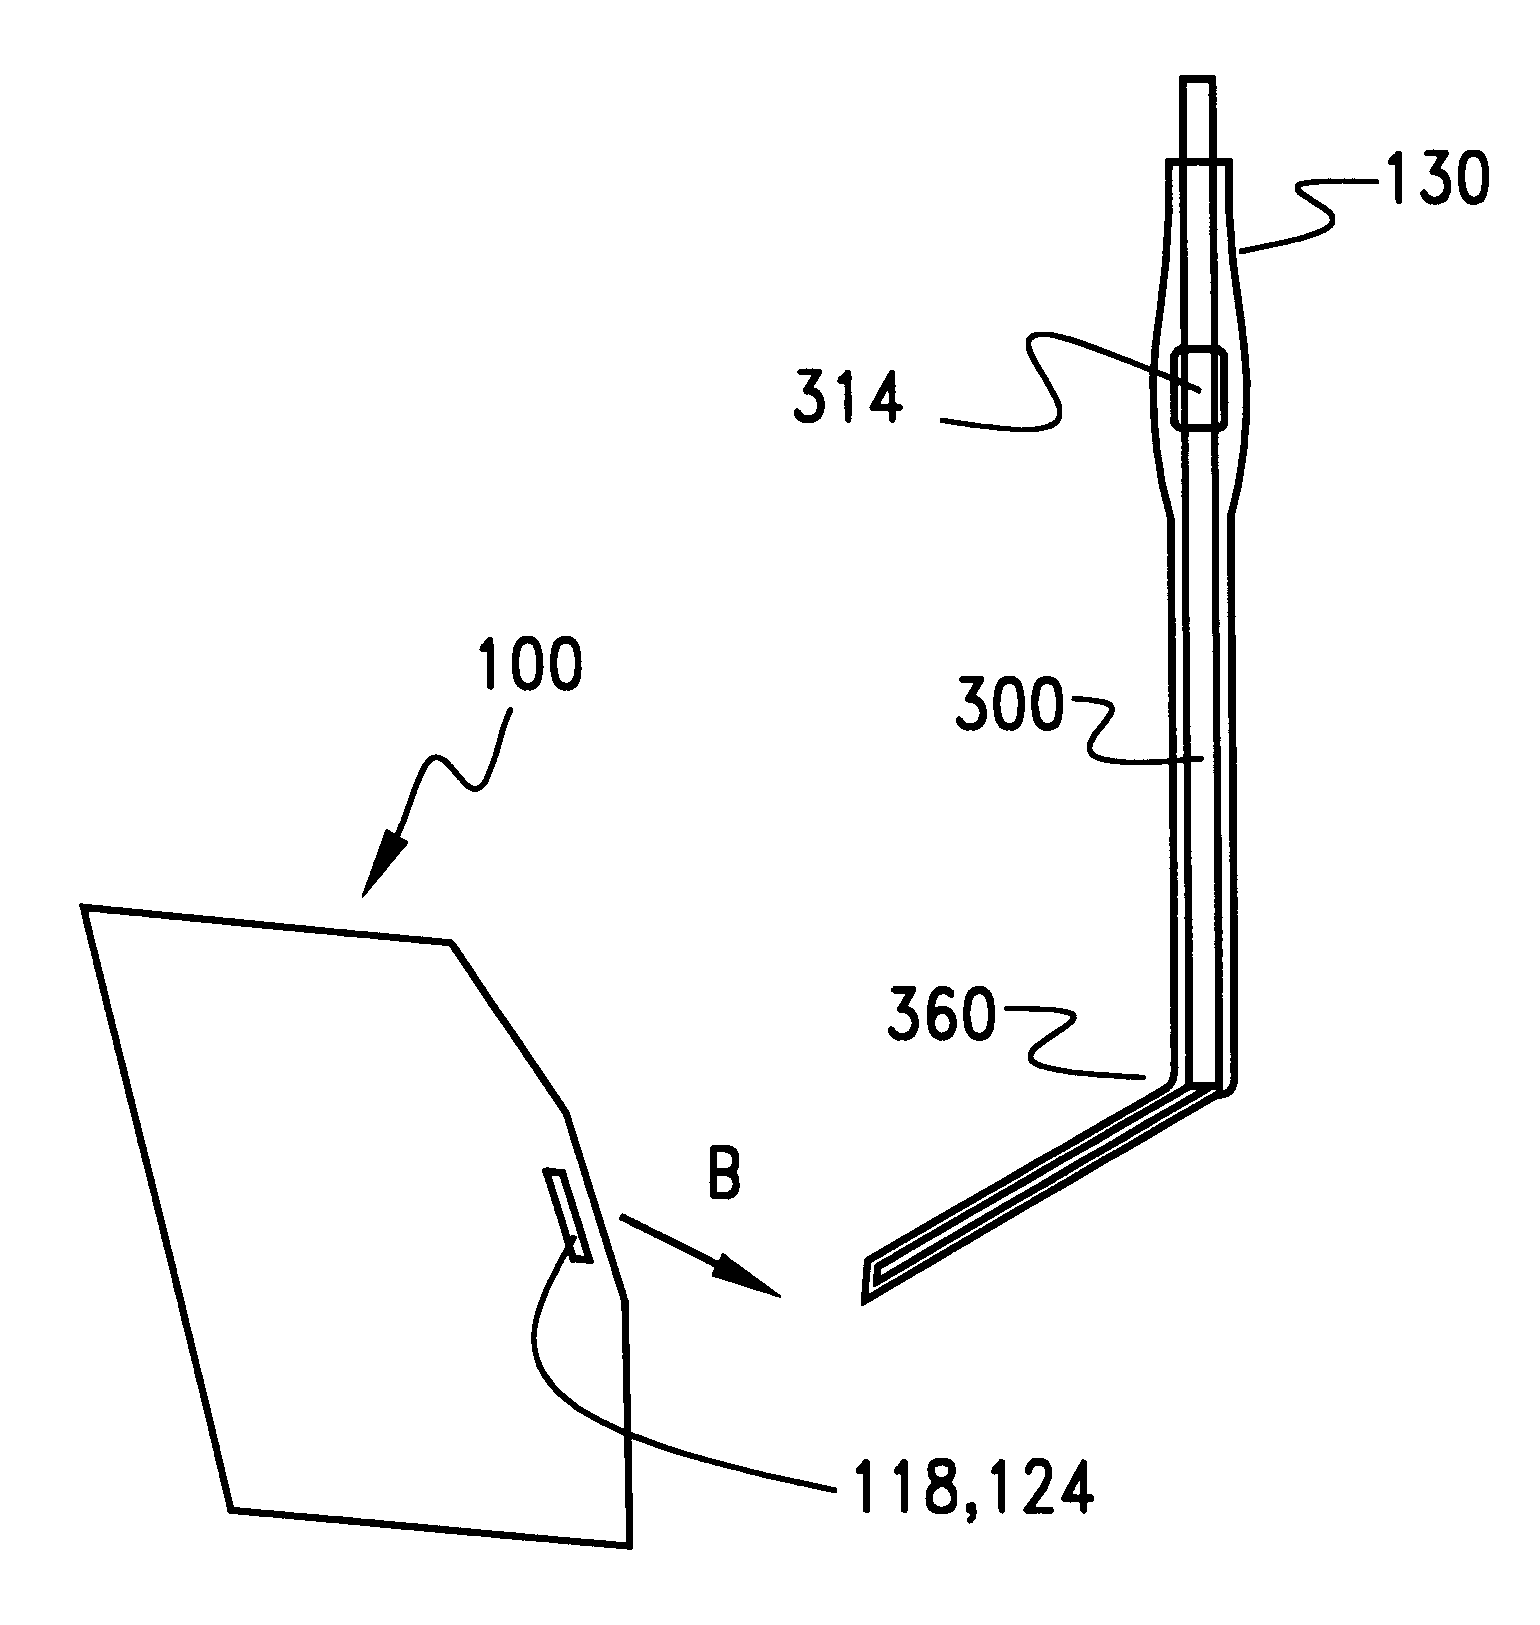 Video display system for locating a projected image adjacent a surgical field